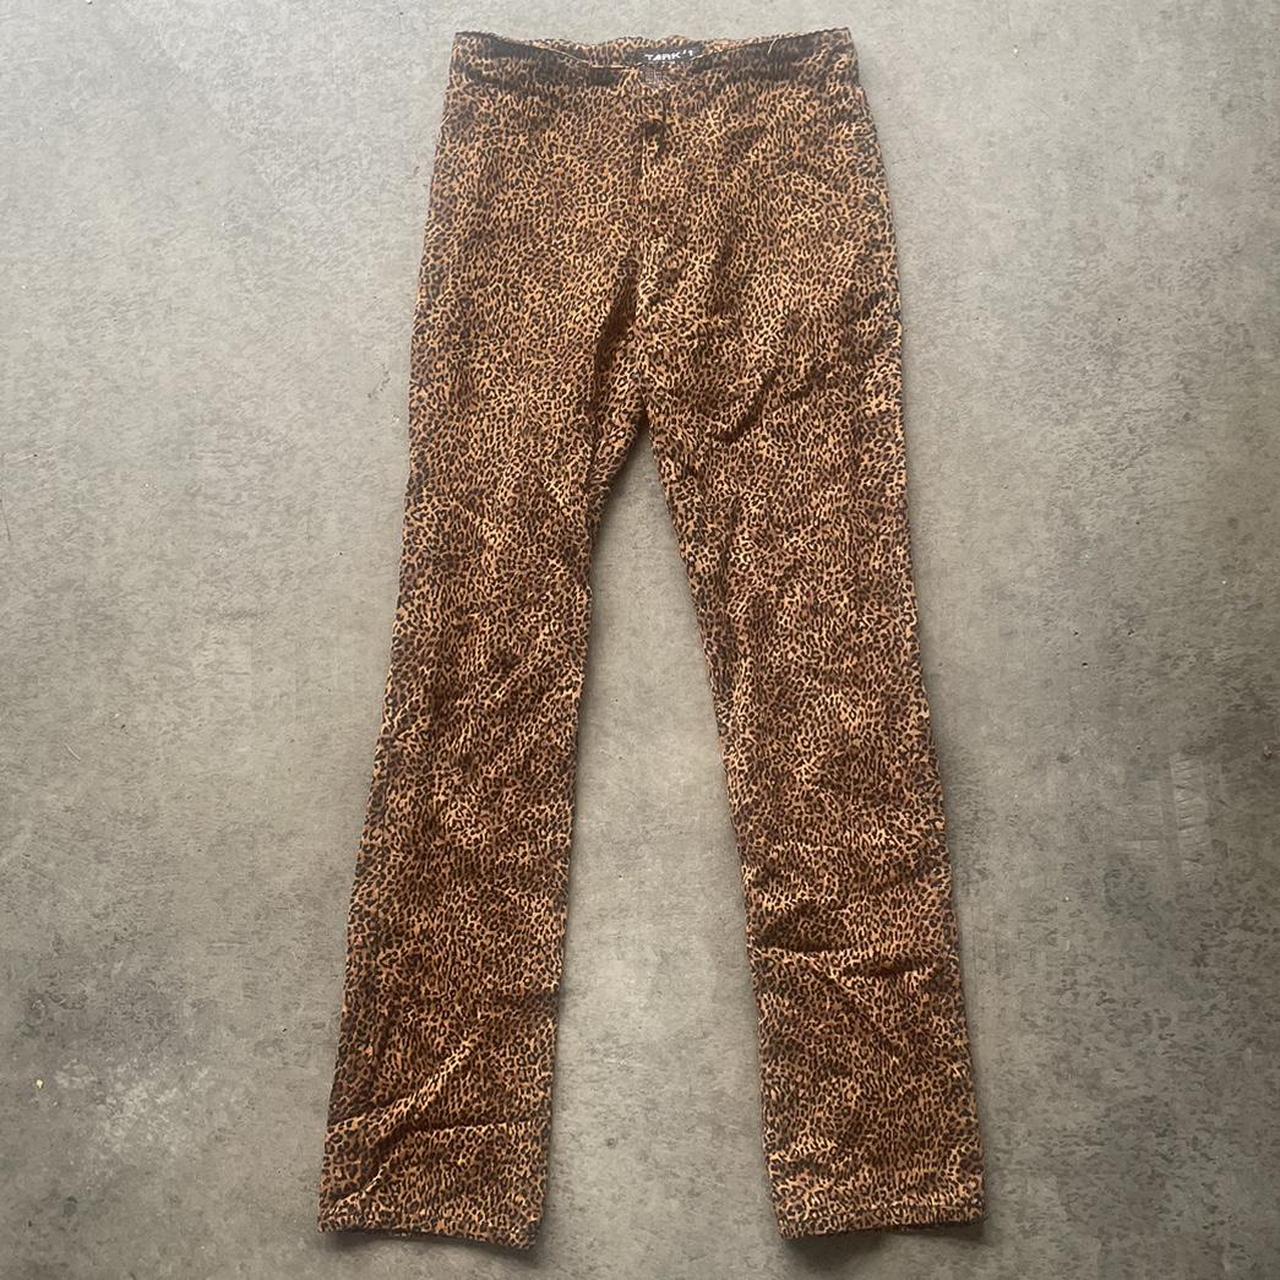 UNIF Winx Pant high waisted slightly flared :) - Depop